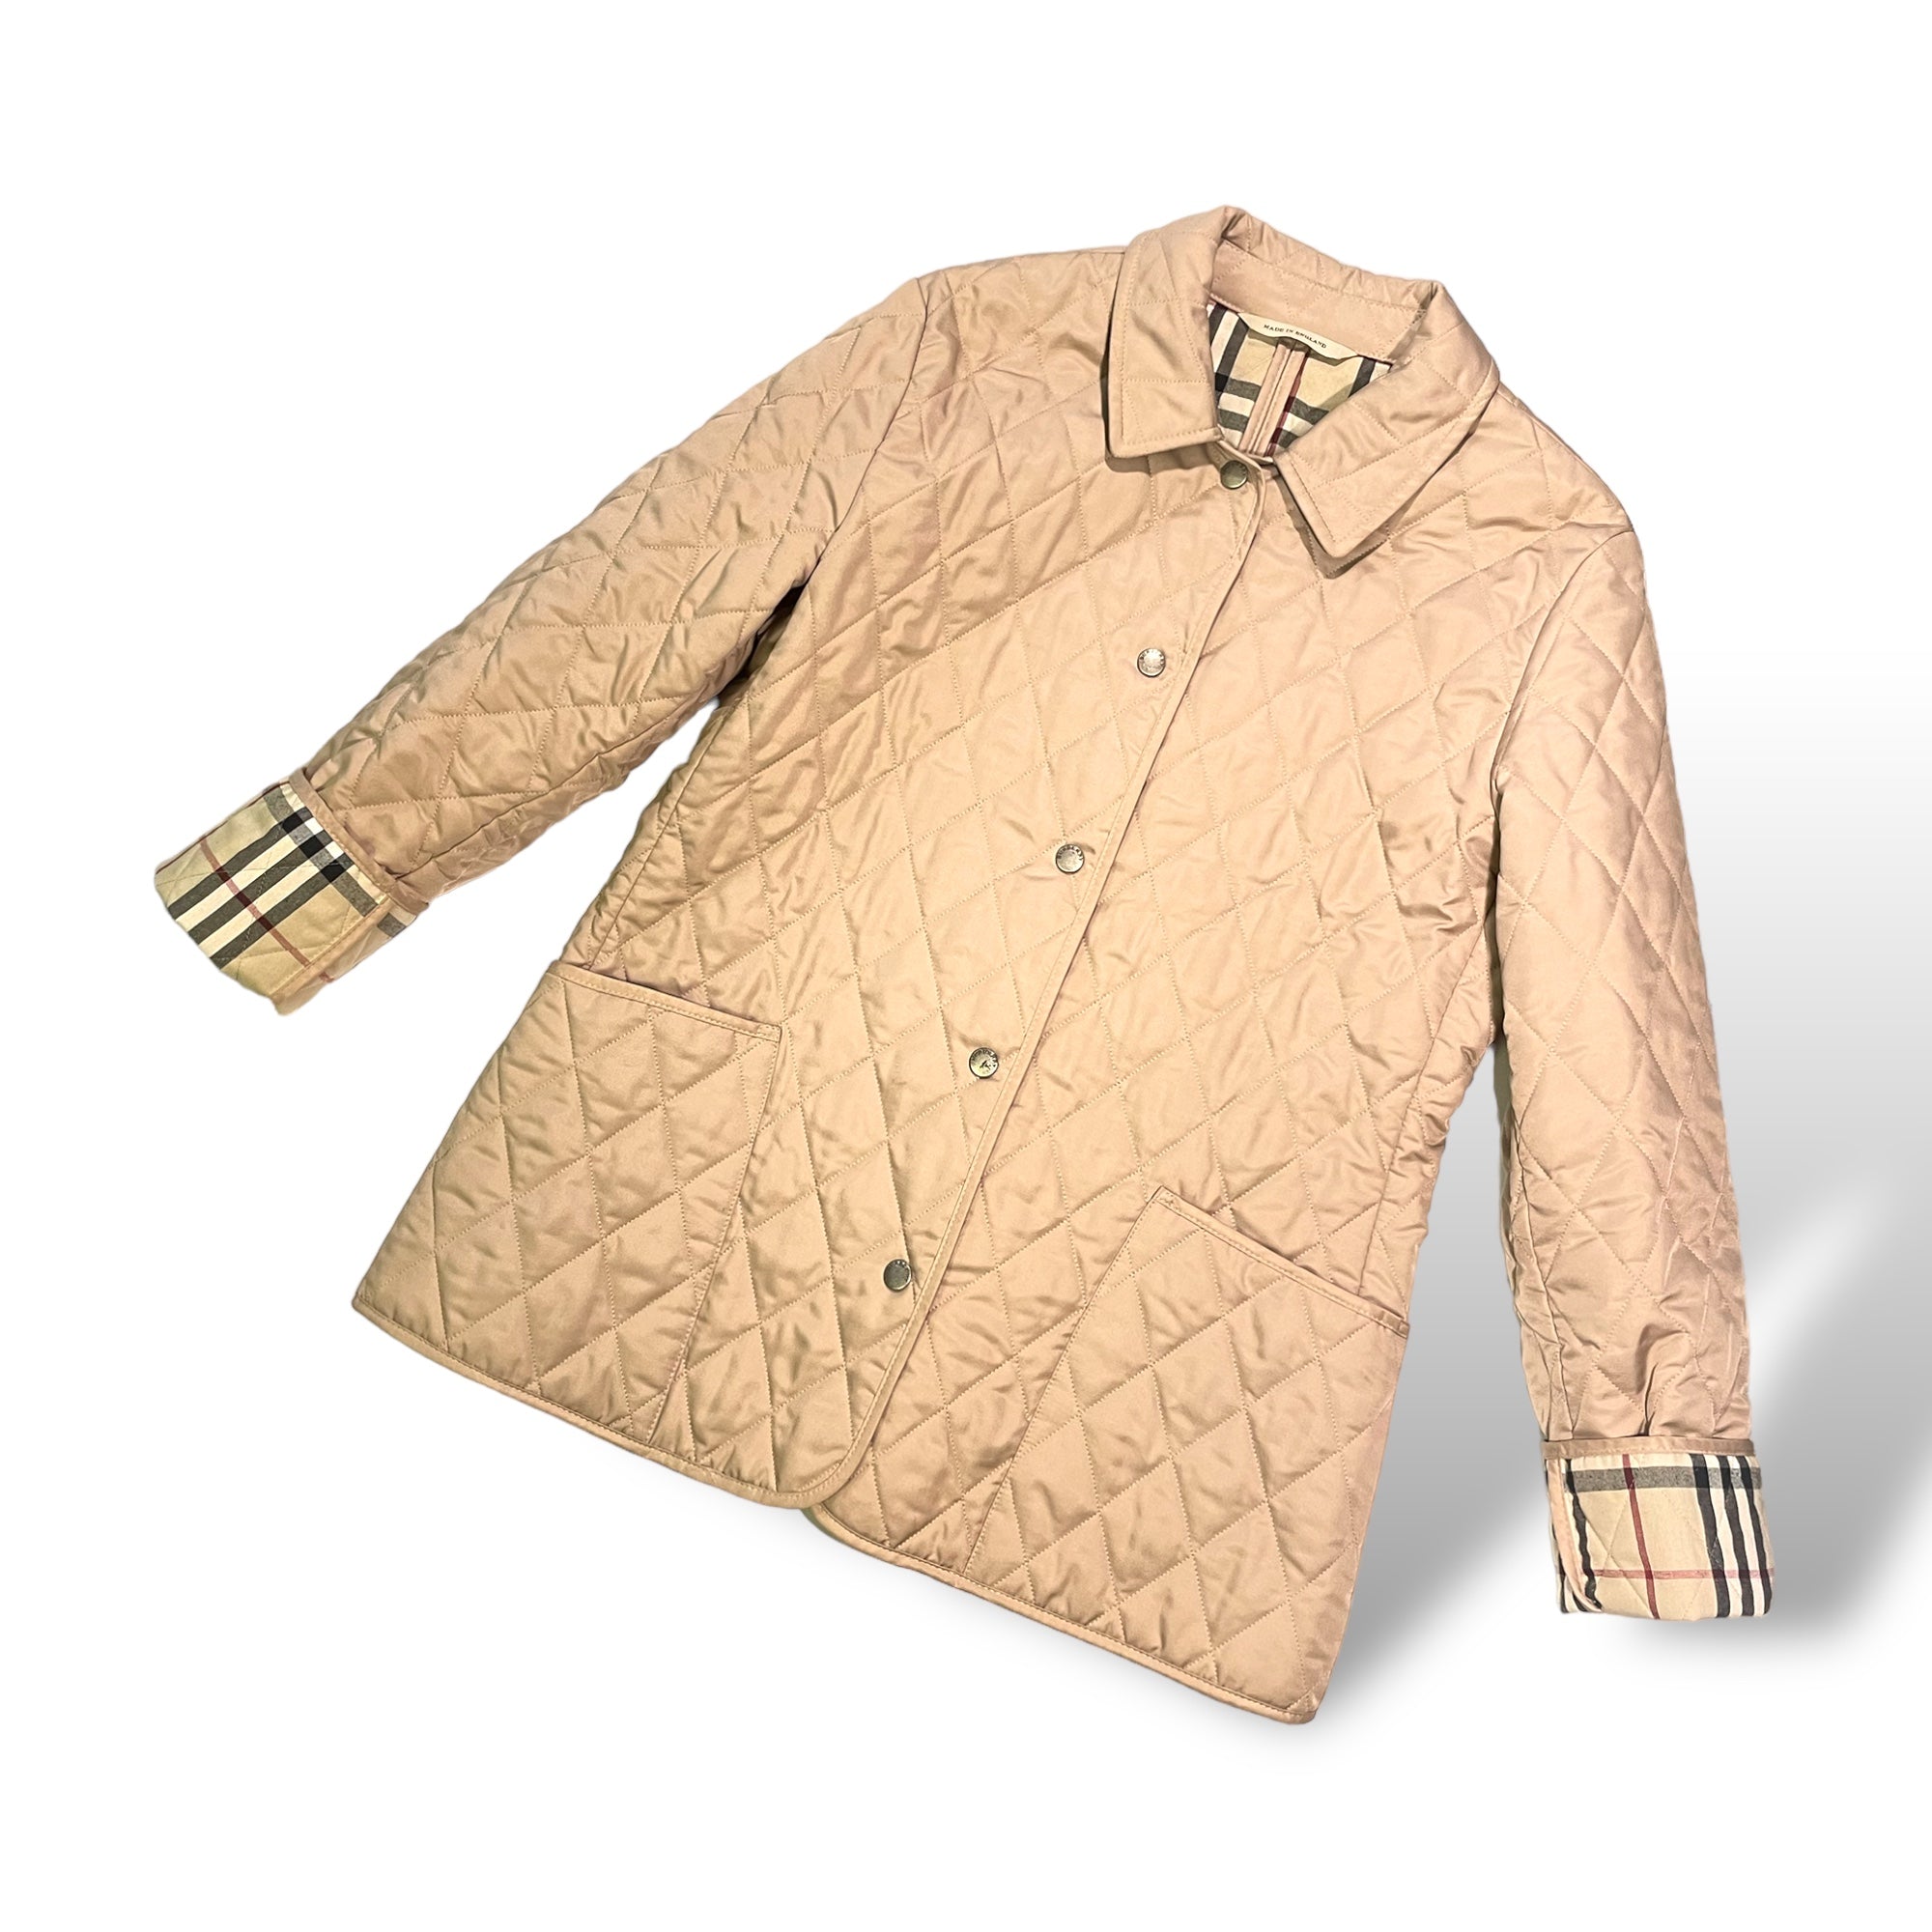 BURBERRY LONDON Classic Quilted Tan/Check Lined Coat |Size: Small|